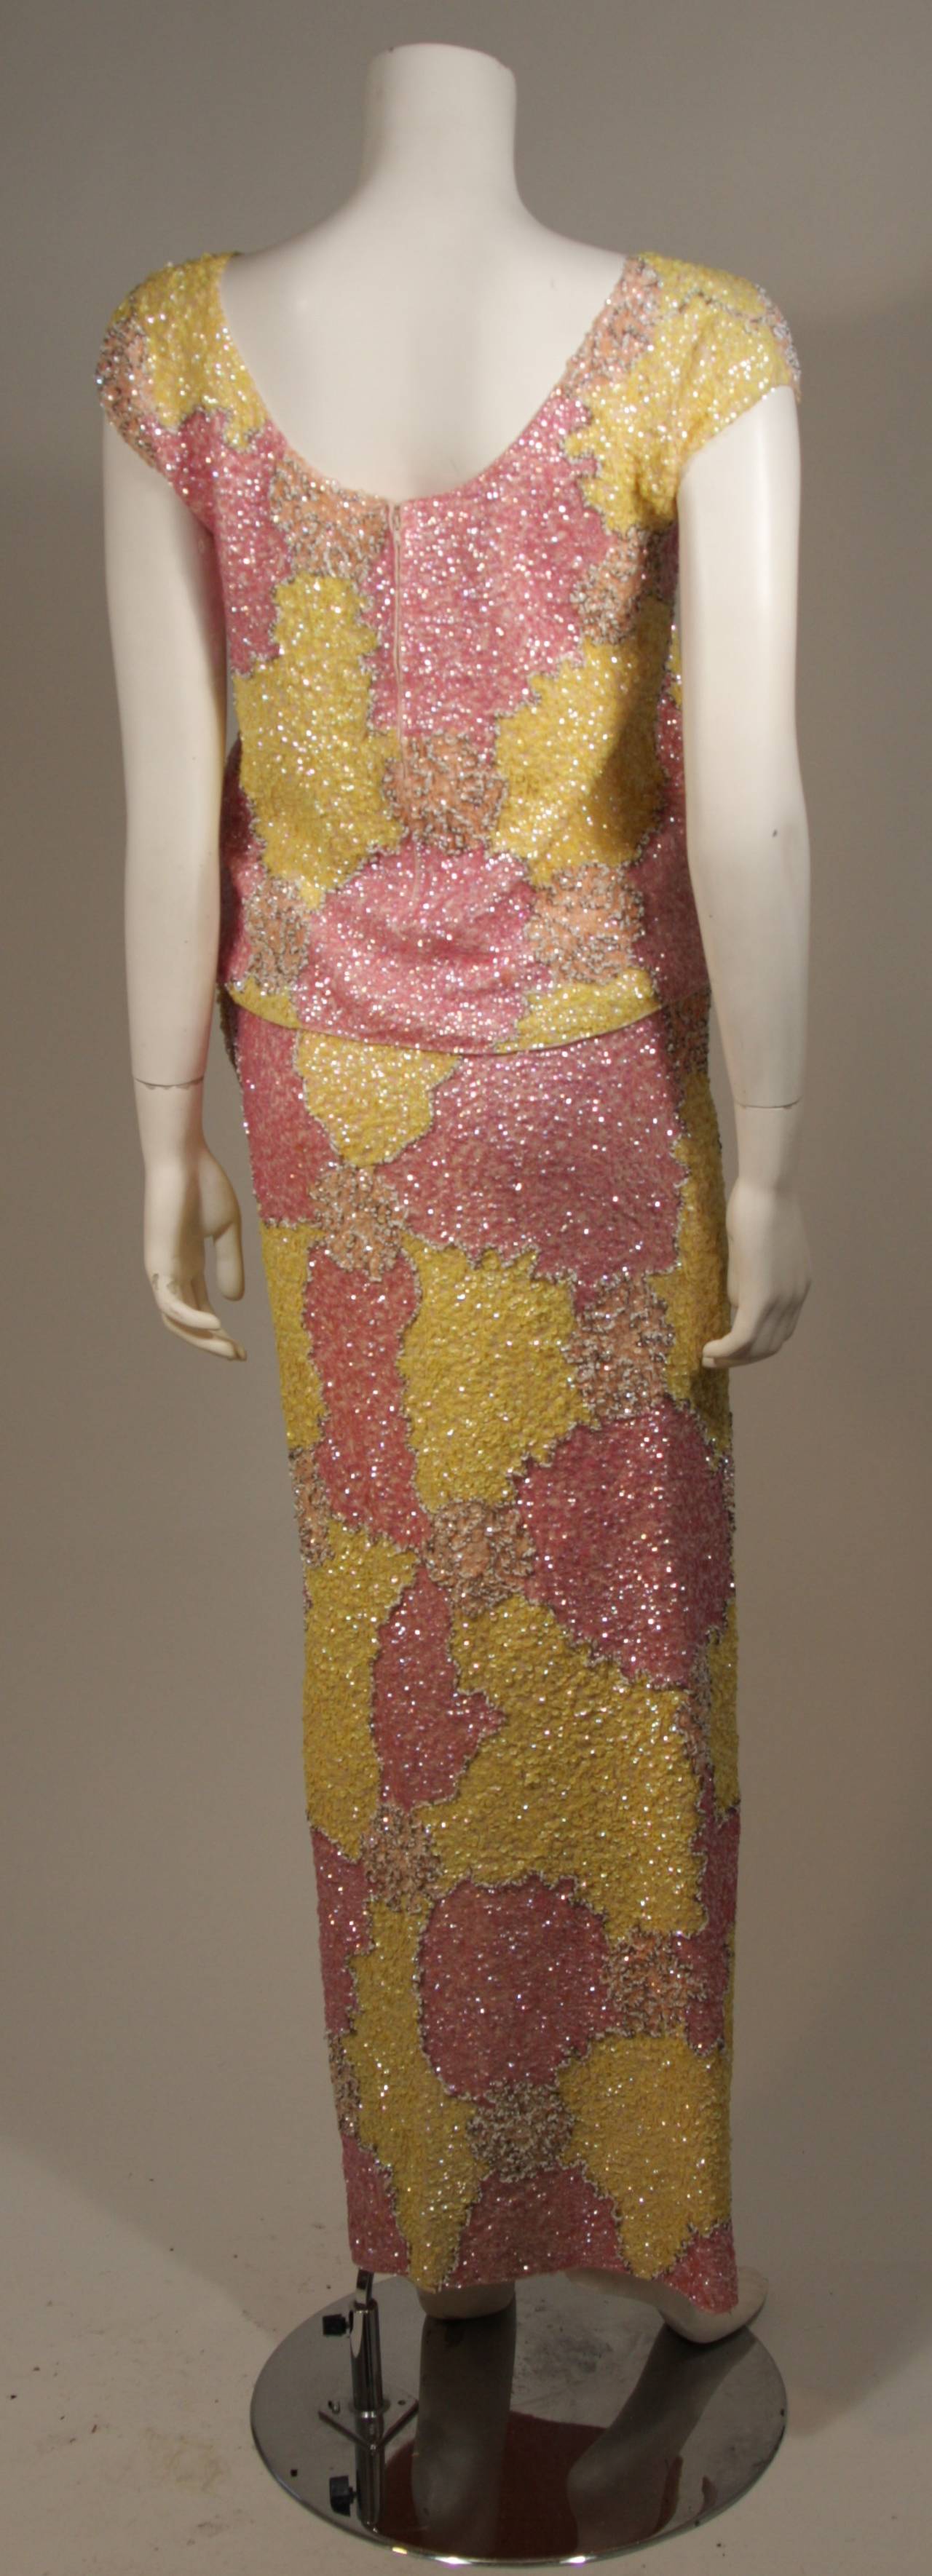 Gene Shelly's Yellow and Pink Stretch Wool Abstract Sequin Motif Evening Set 6-8 For Sale 2